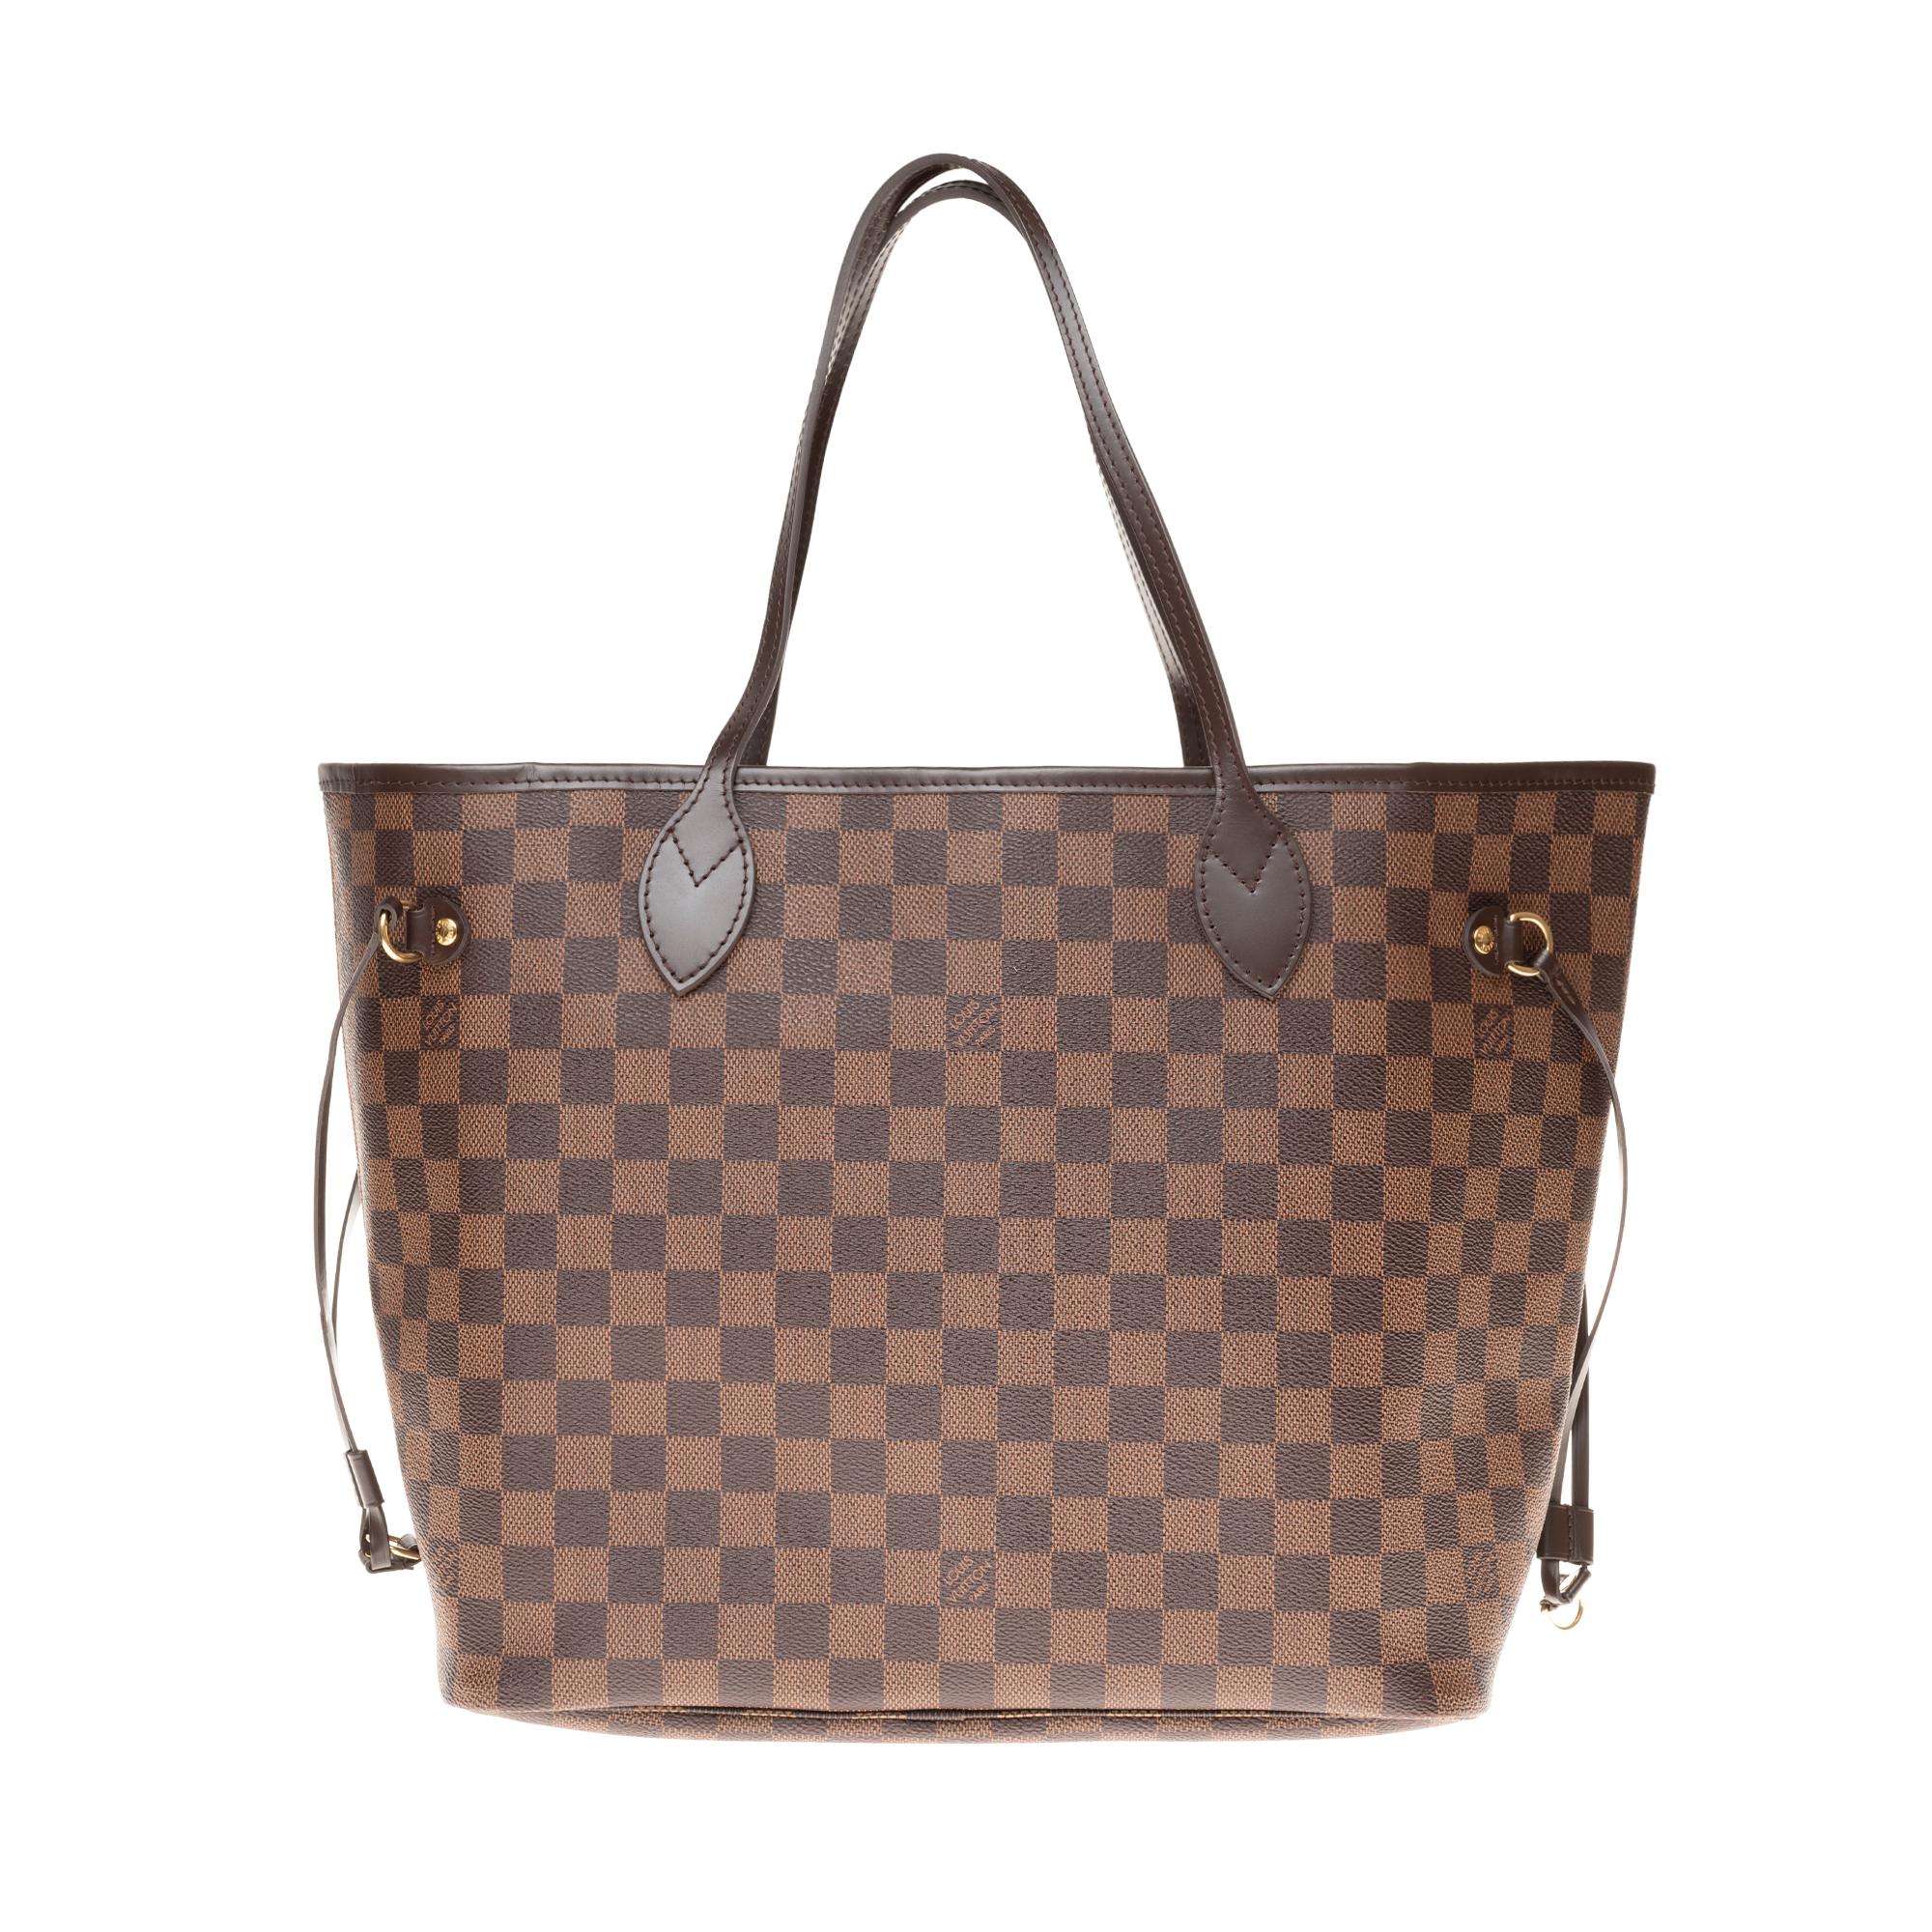 Louis Vuitton Neverfull MM Tote in brown damier canvas with pouch (Braun)